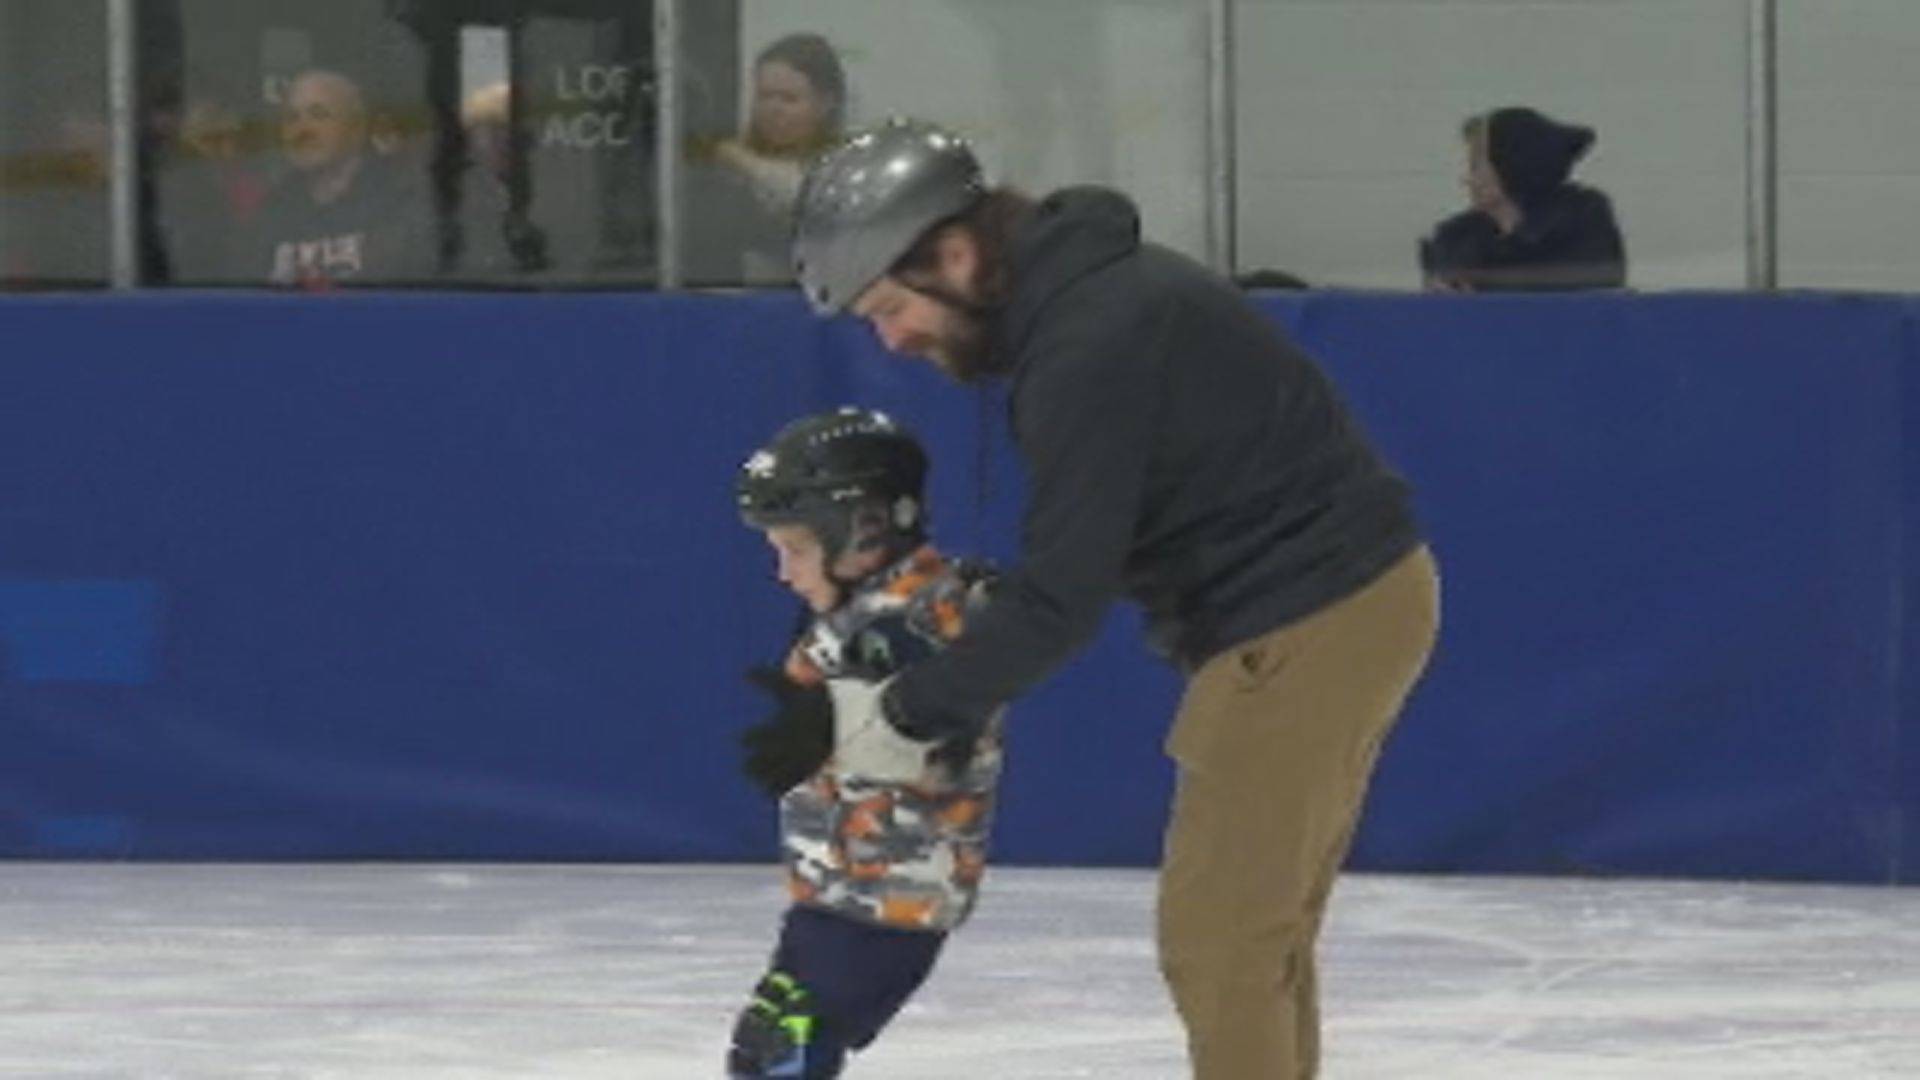 Ukrainian and Syrian families come together for newcomer skate in Lethbridge